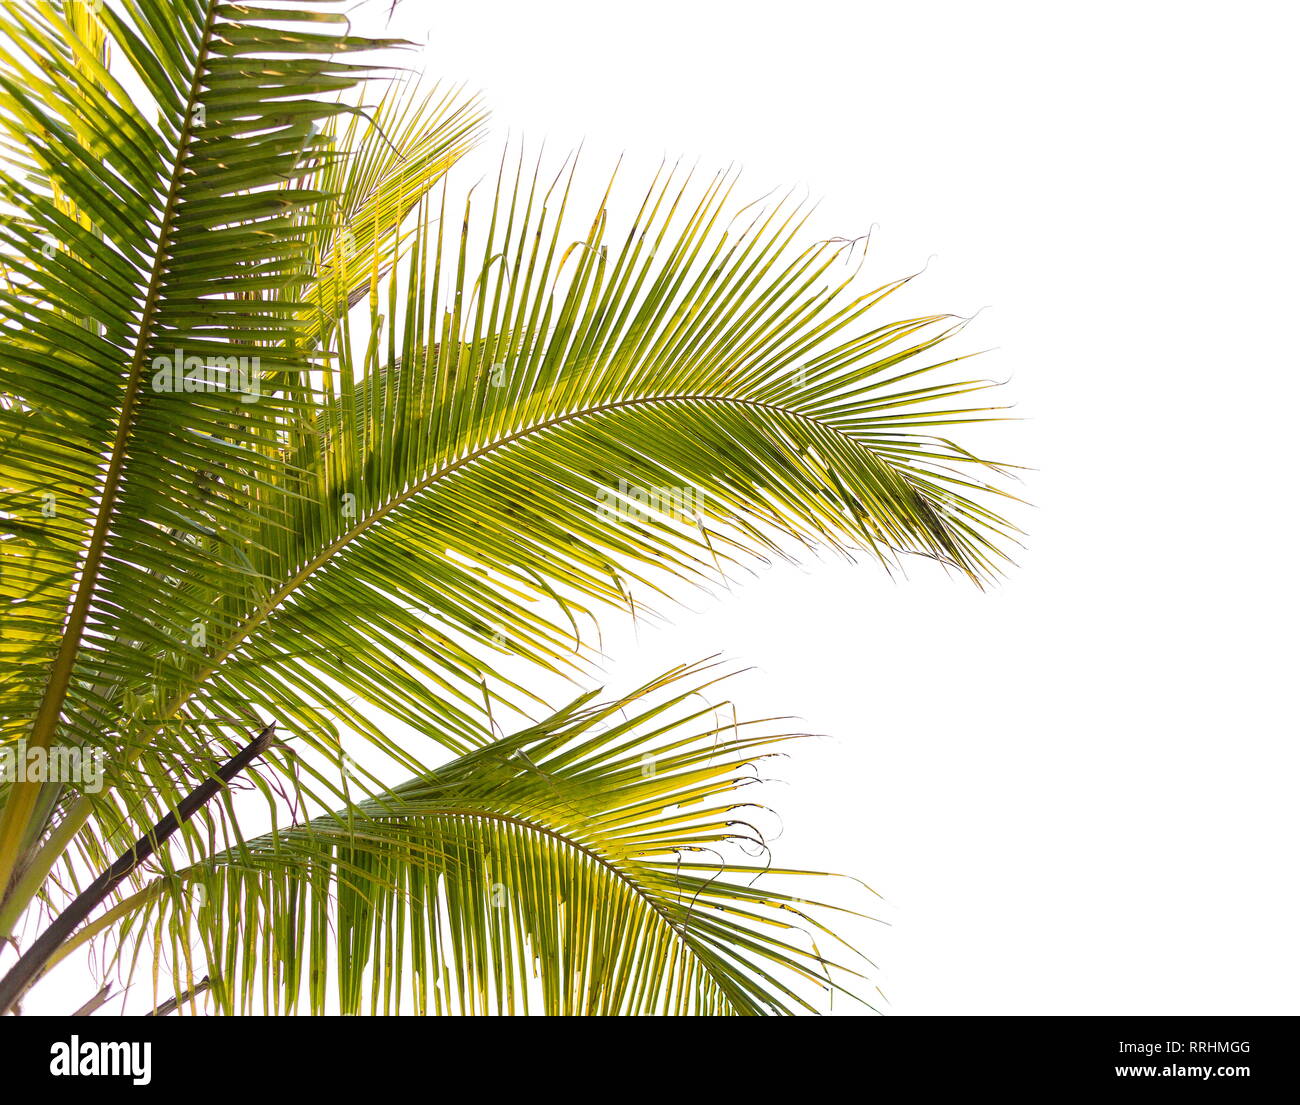 Under coconut tree and coconut leaves on a white background. Stock Photo